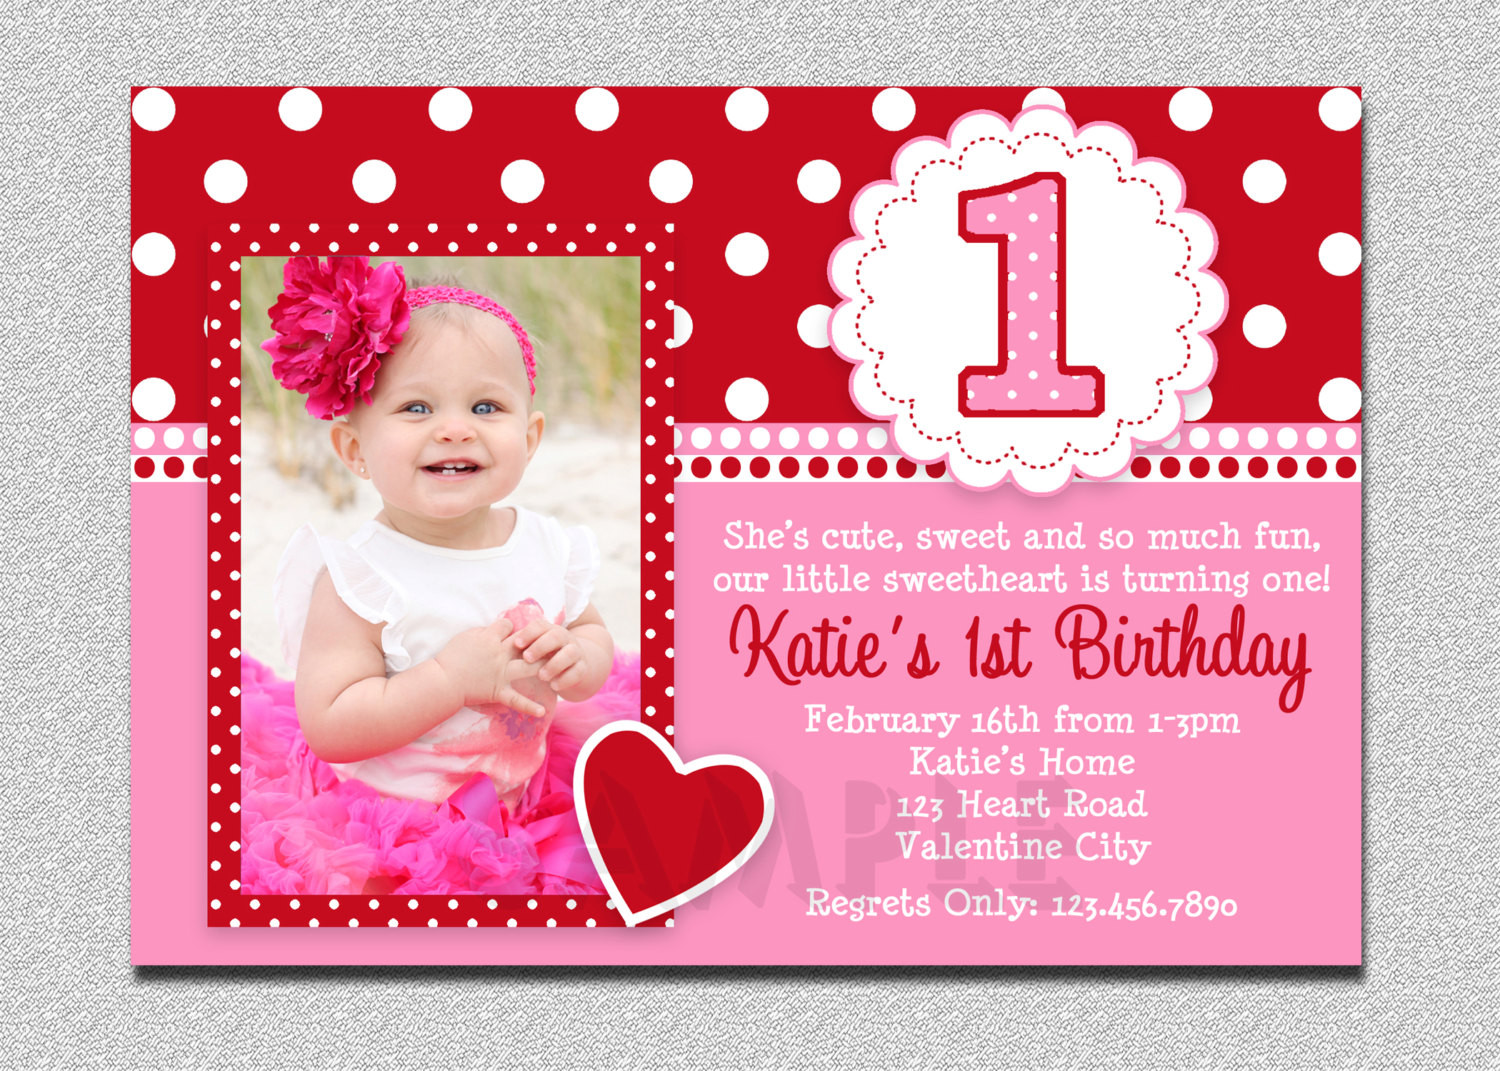 First Birthday Party Invitation Wording
 First Birthday Party Invitation Ideas – Bagvania FREE